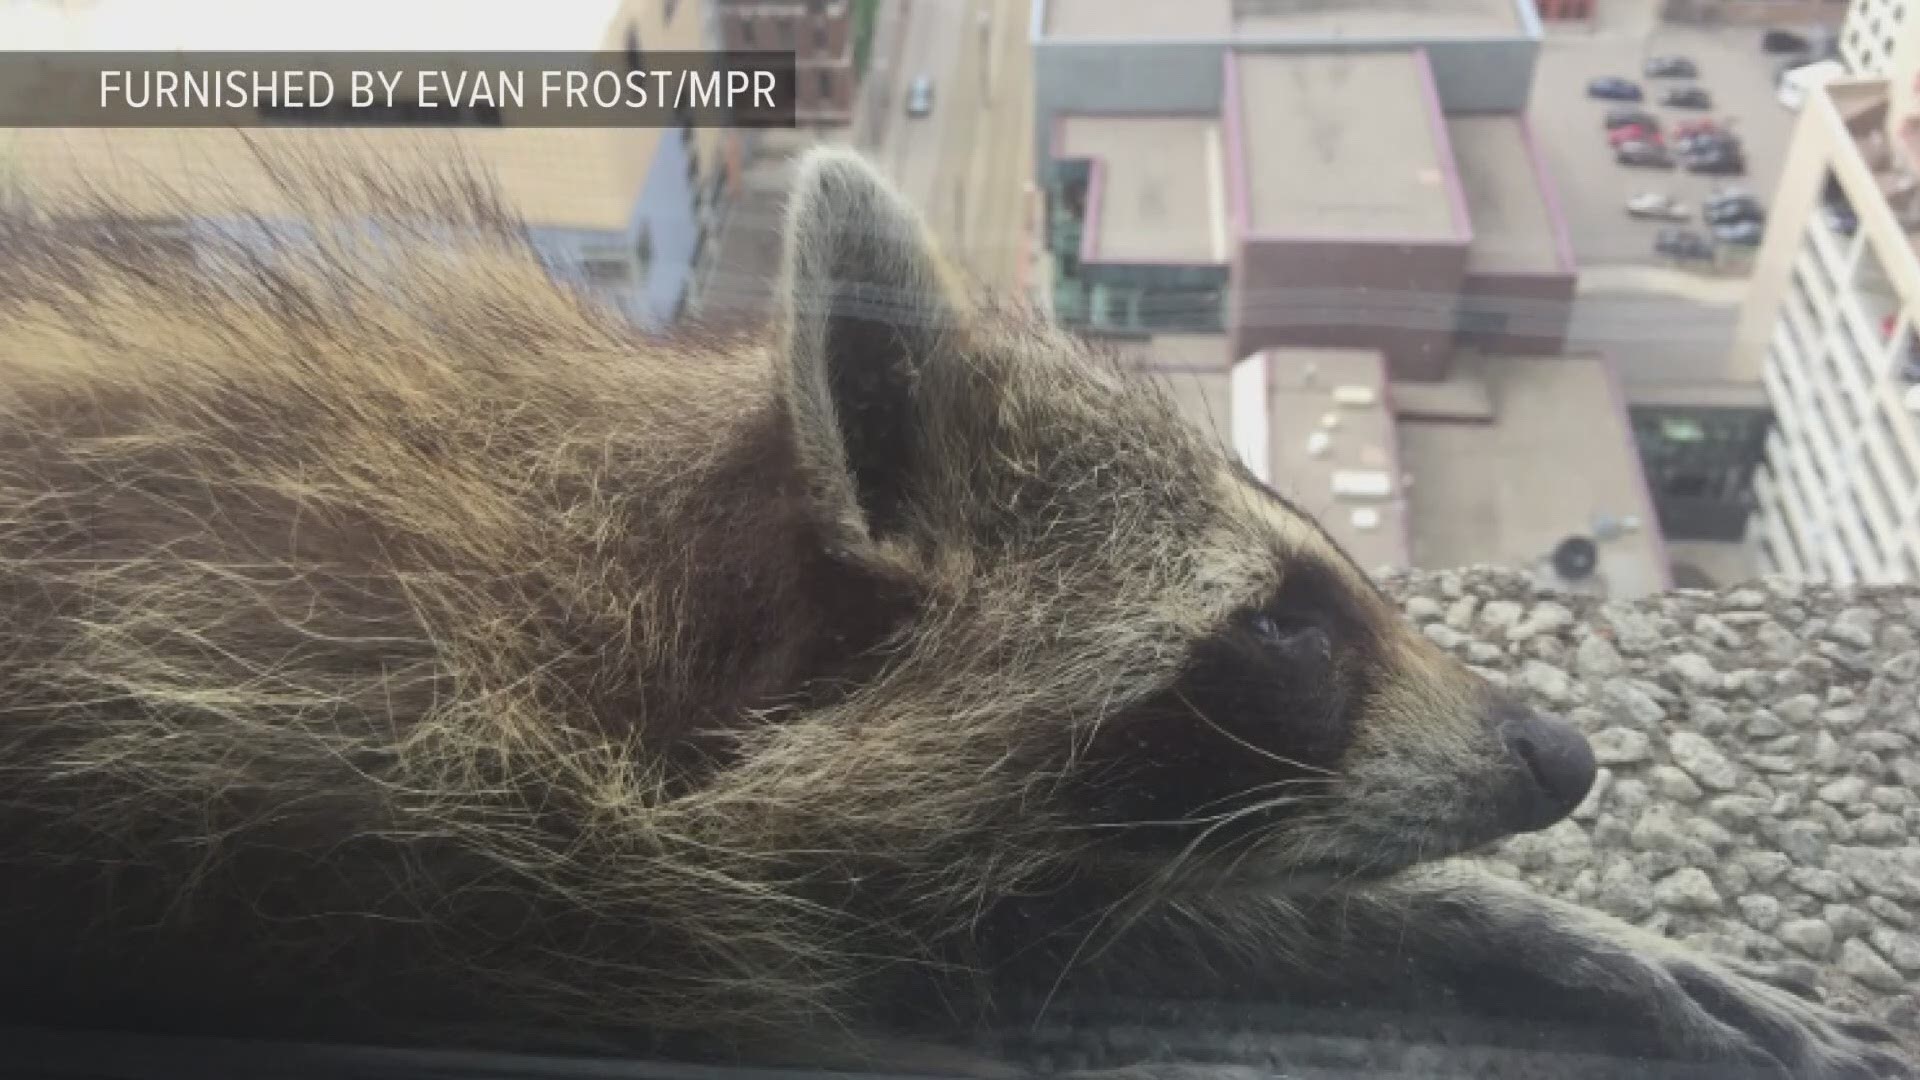 A raccoon in St. Paul, Minnesota has captivated the country. https://kare11.tv/2y5kLot